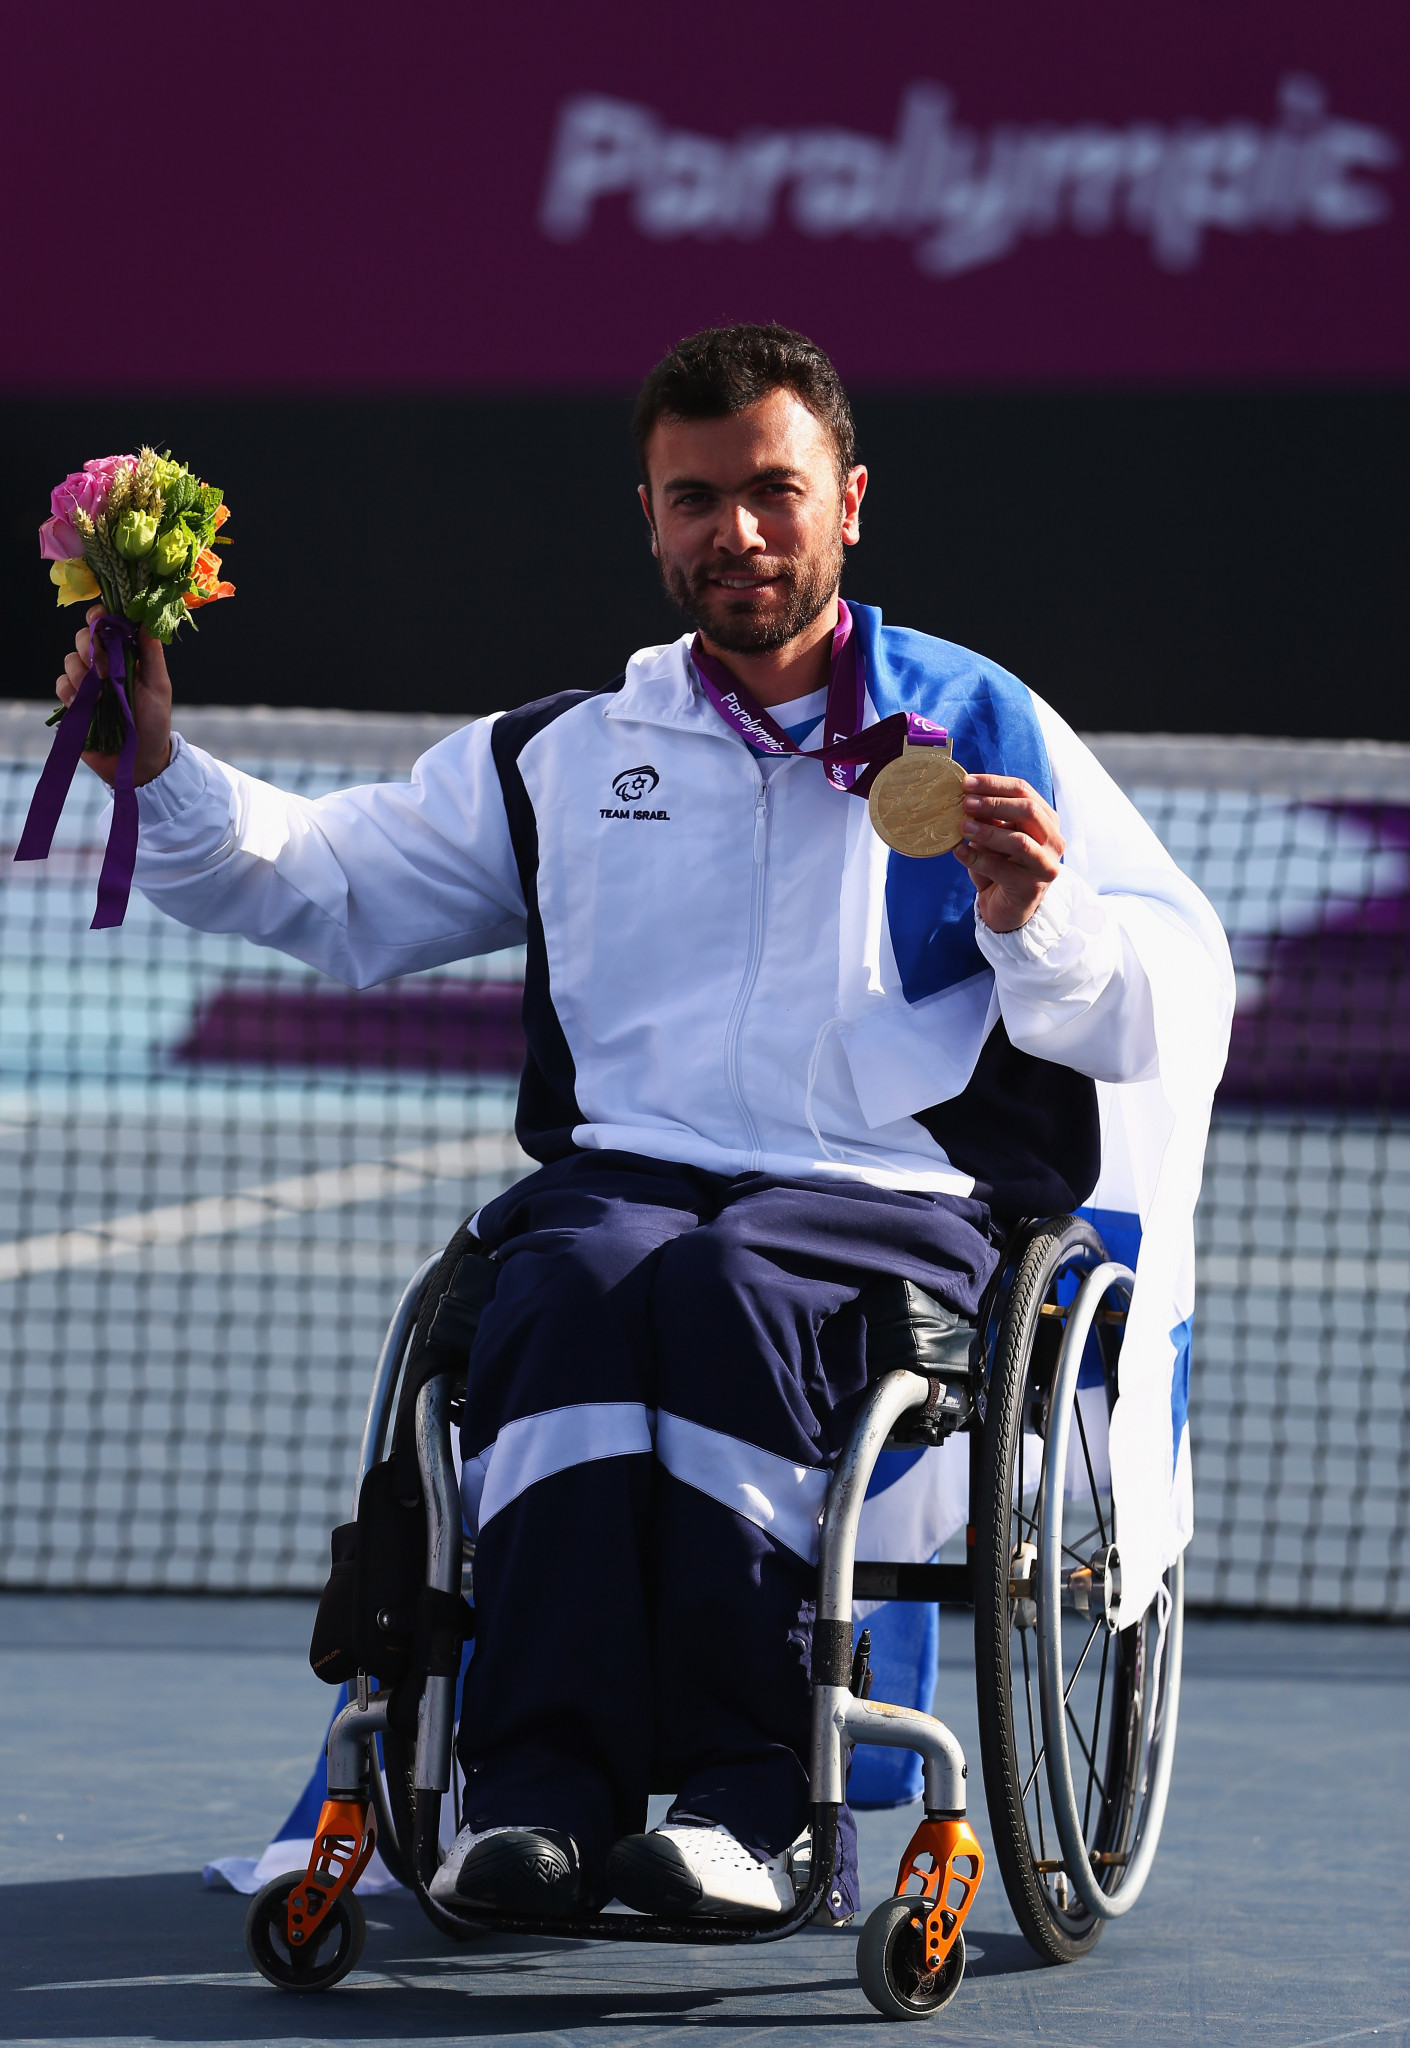 Israel's last Paralympic gold medal came in 2012 when Noam Gershony took gold in the quad tennis ©Getty Images